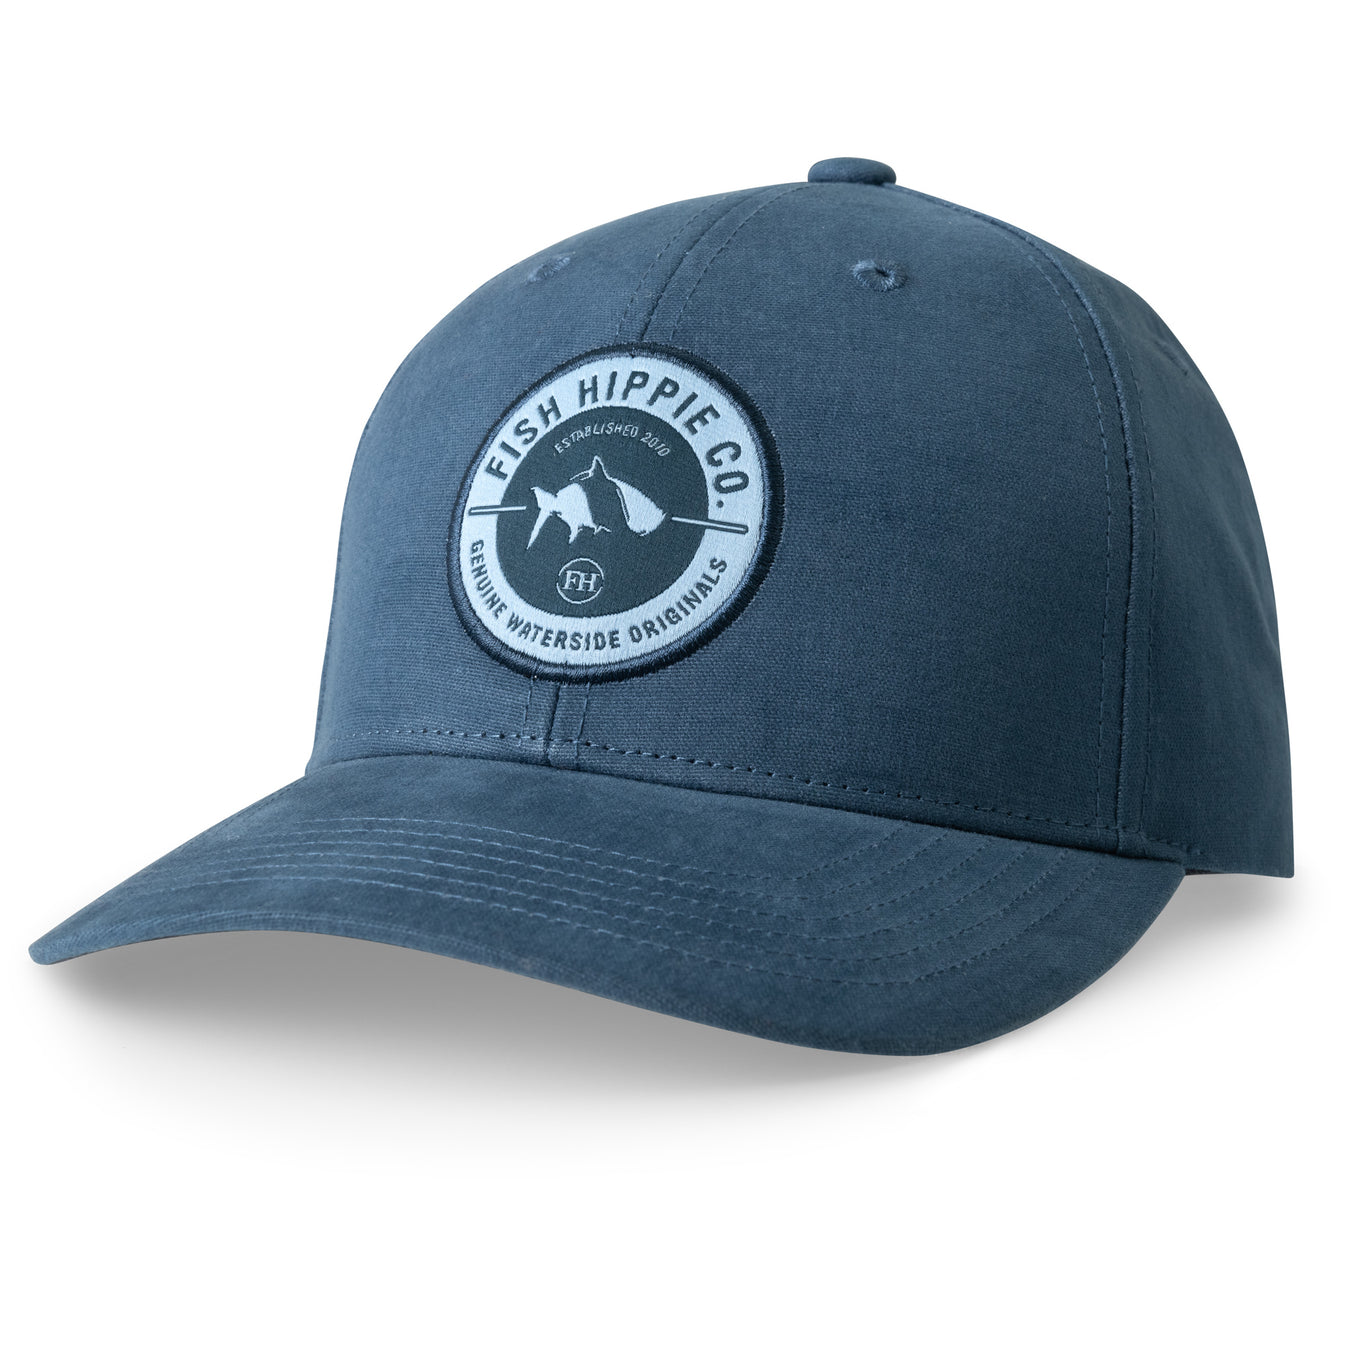 Fish Hippie FH Drifter Structured Hat Slate Os